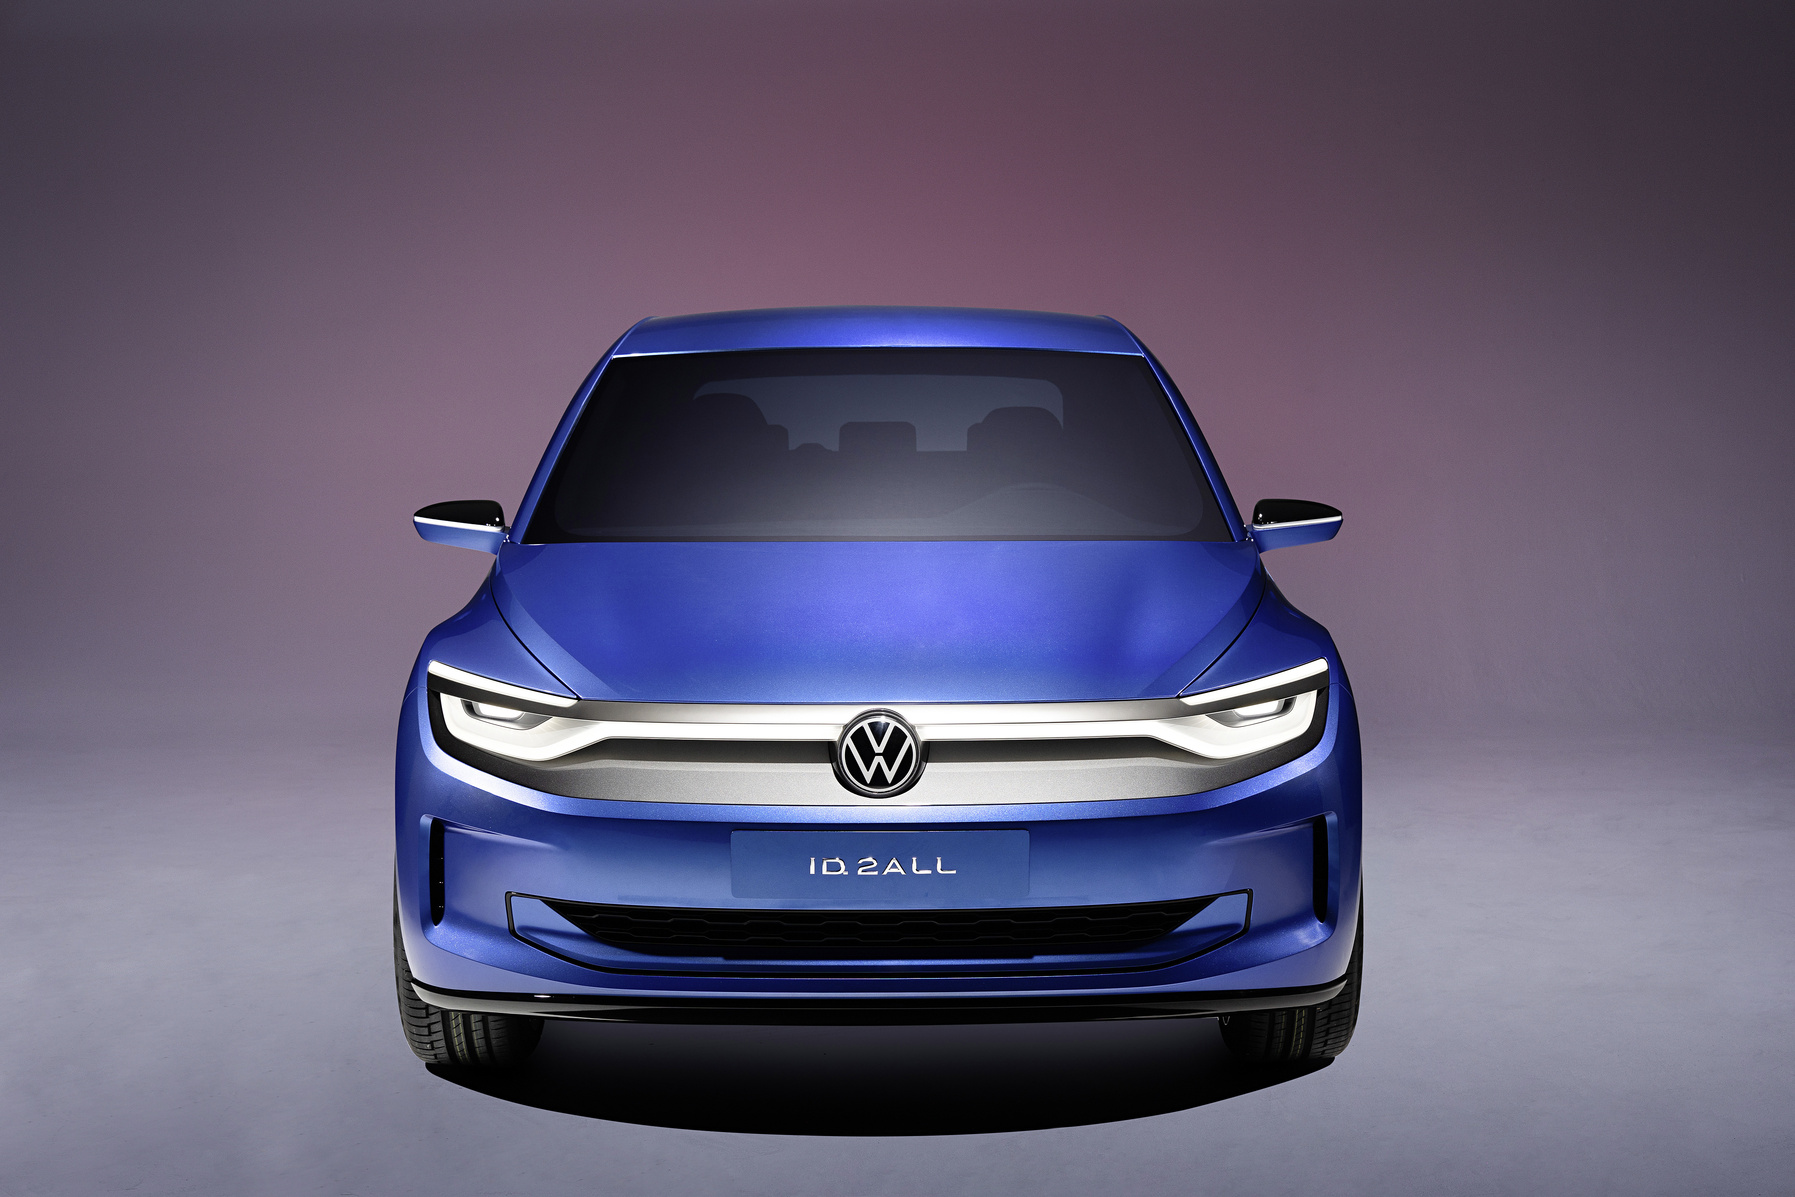 volkswagenid.2all, vw, volkswagen, electric, volkswagen, volkswagen id.2, volkswagen golf, volkswagen polo, electric, vw, volkswagen says that the id.2all has a golf-sized interior, but will be smaller than the id.3